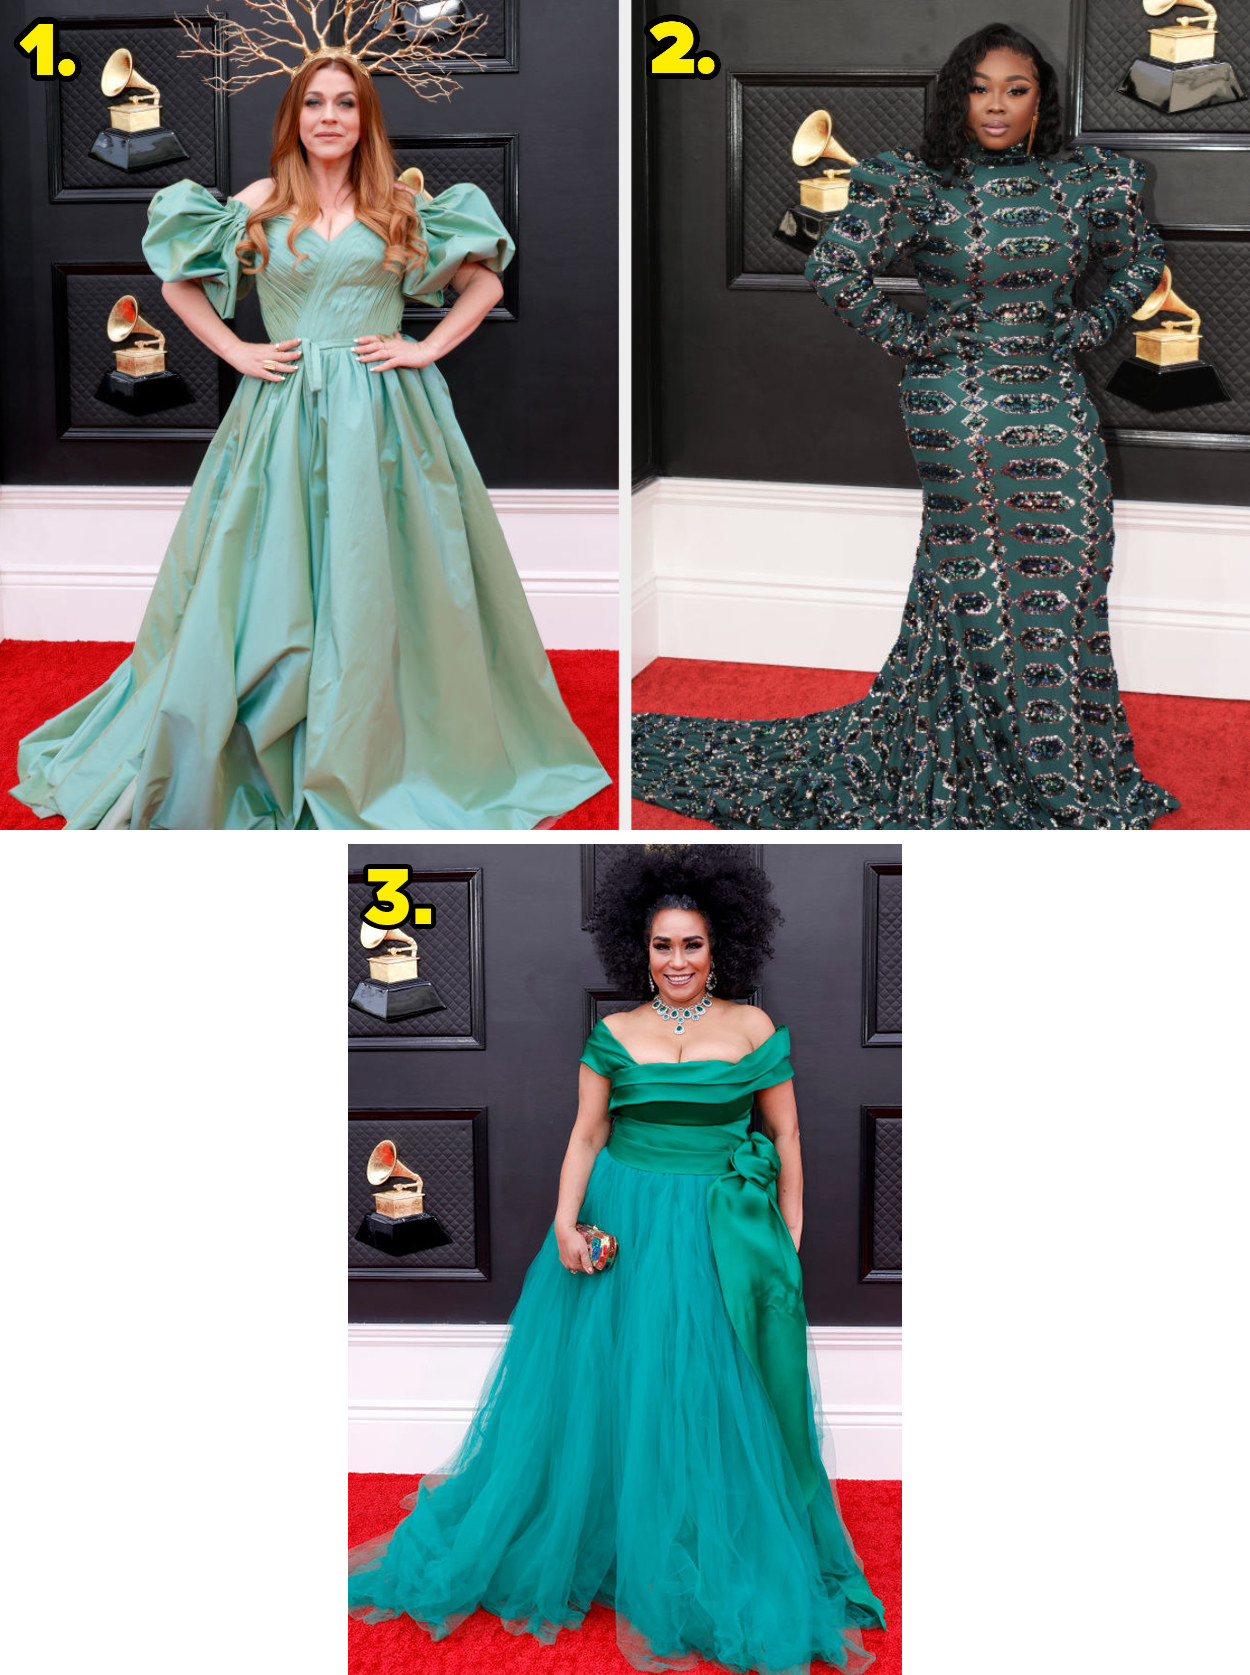 1. An off-the-shoulder ball gown with a crown that imitates tree branches. 2. A printed gown with puffy shoulder pads. 3. An off-the-shoulder gown with a flowy skirt and a sash tied into a bow around the waist.